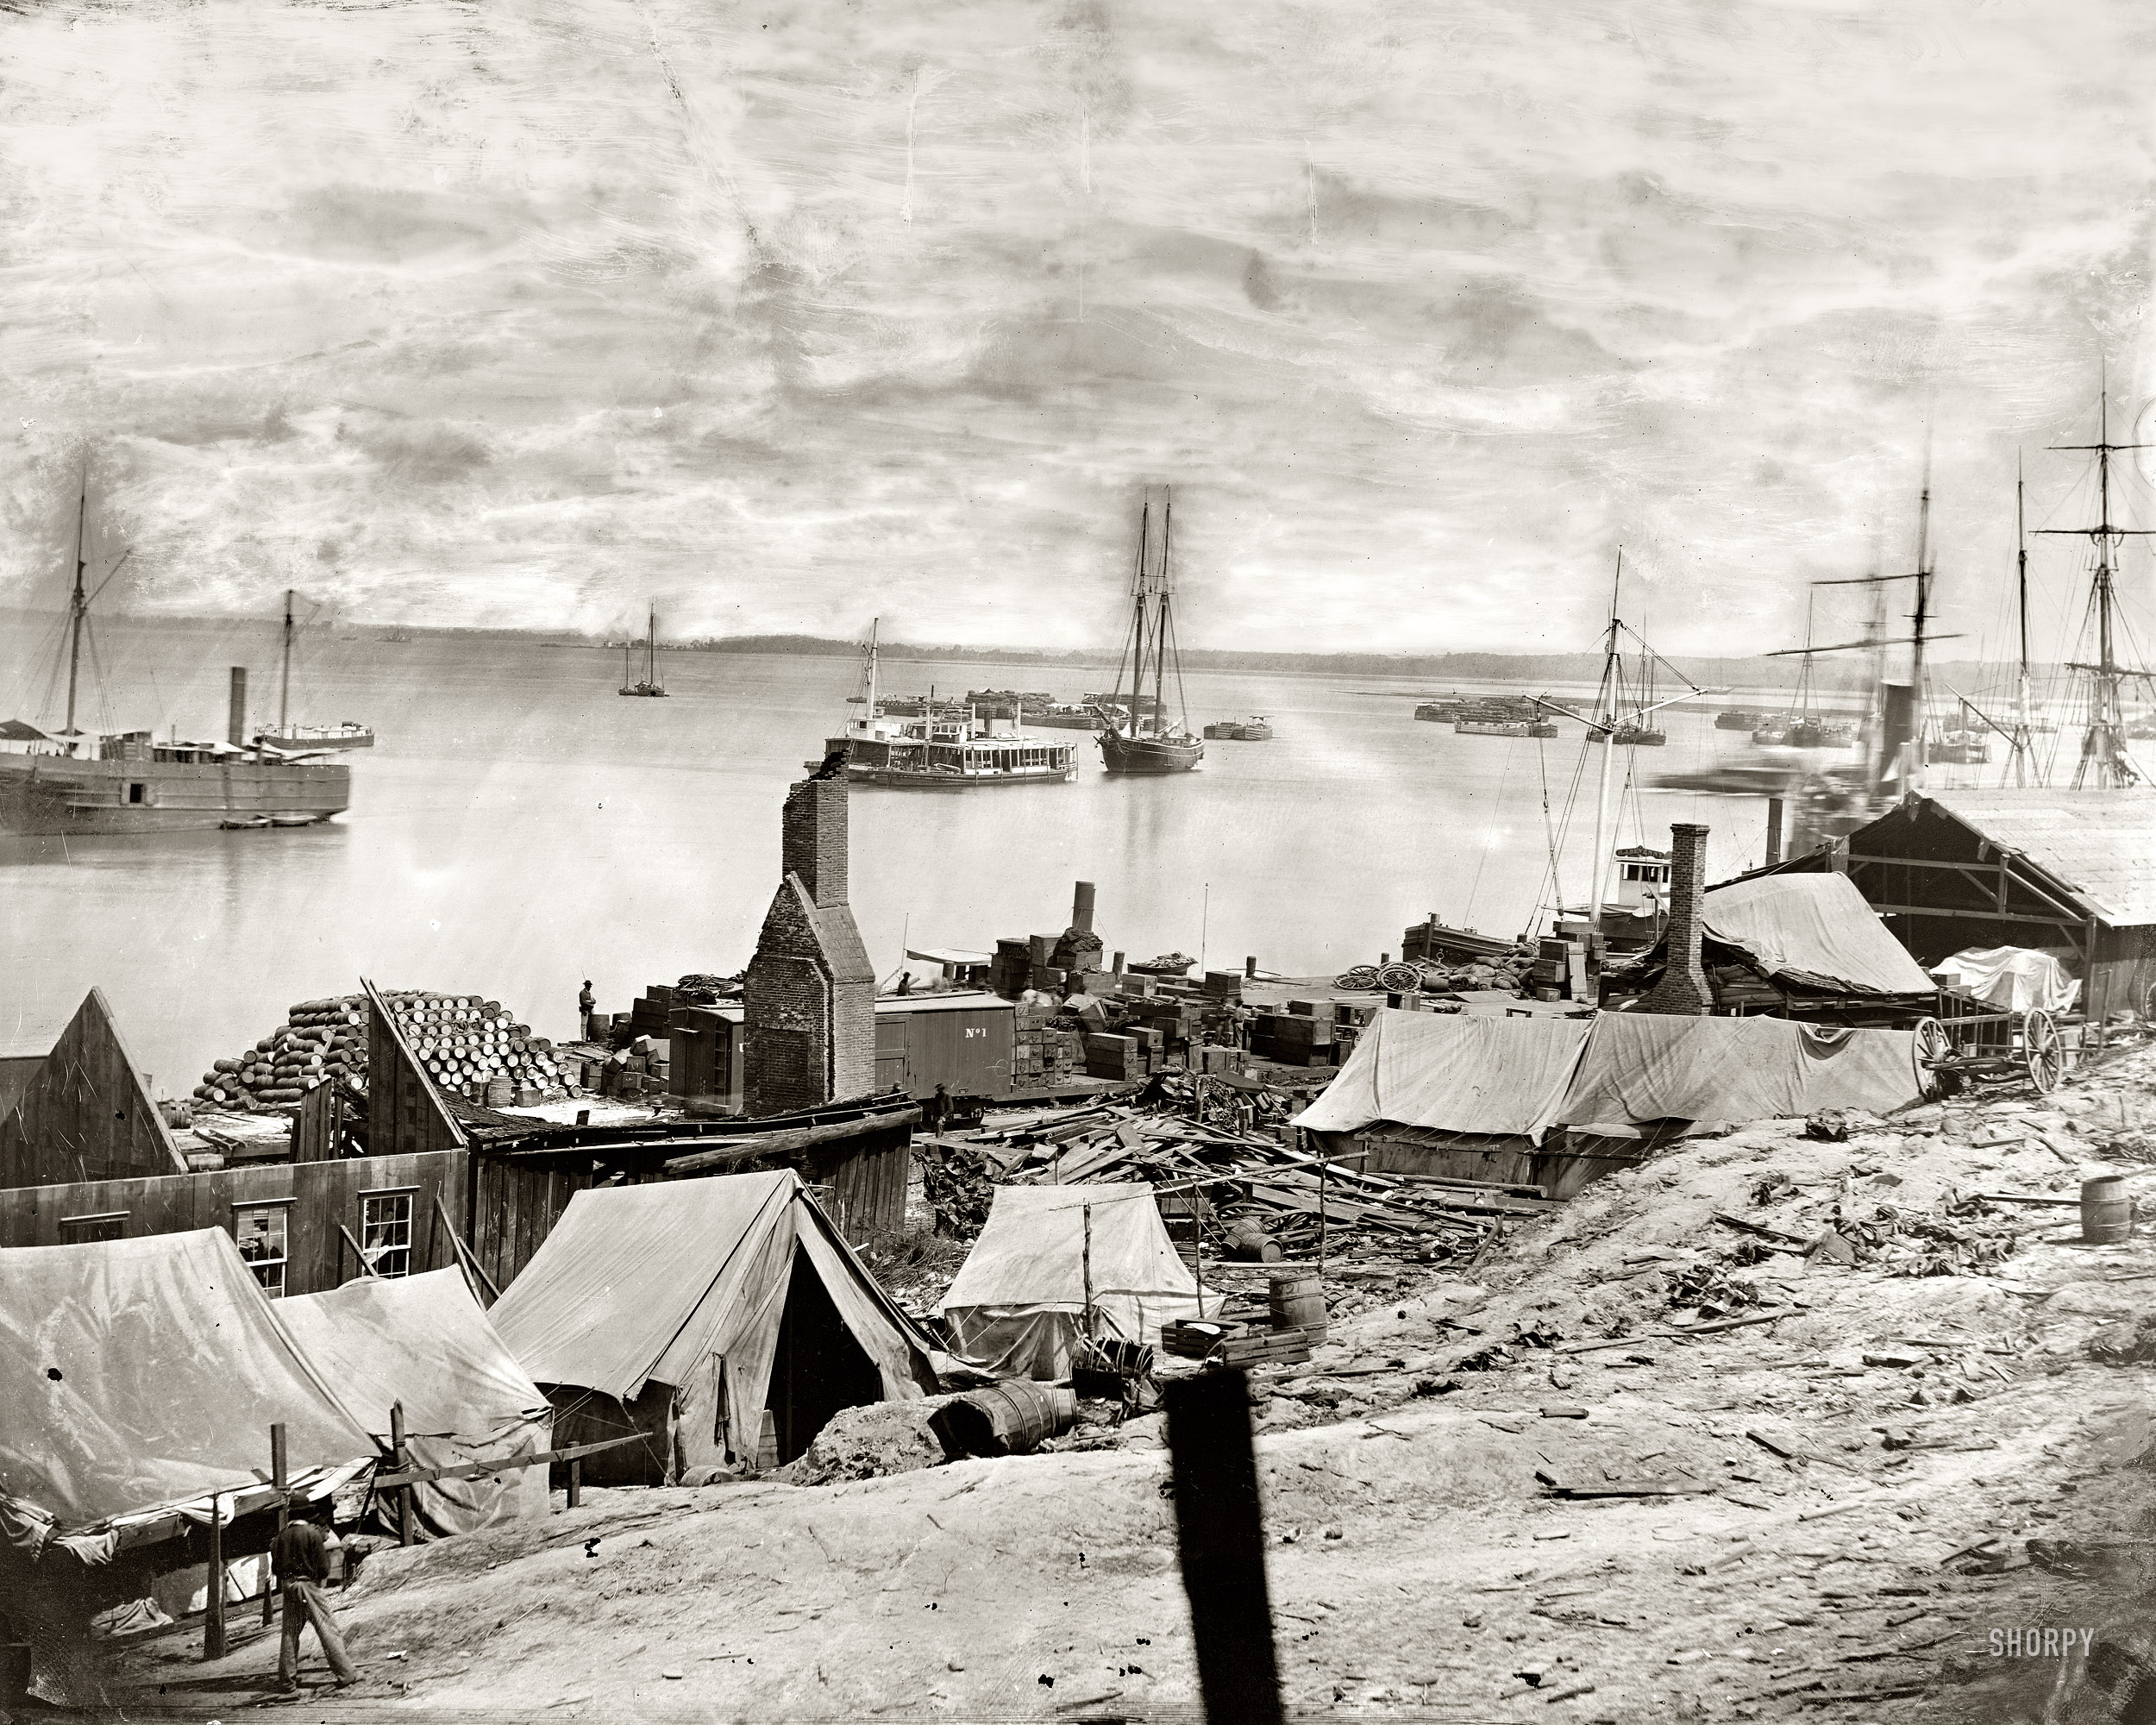 City Point, Virginia. "Wharves after the explosion of ordnance barges on August 4, 1864." Wet-plate glass negative from photographs of the main Eastern theater of war, the siege of Petersburg, June 1864-April 1865. View full size.